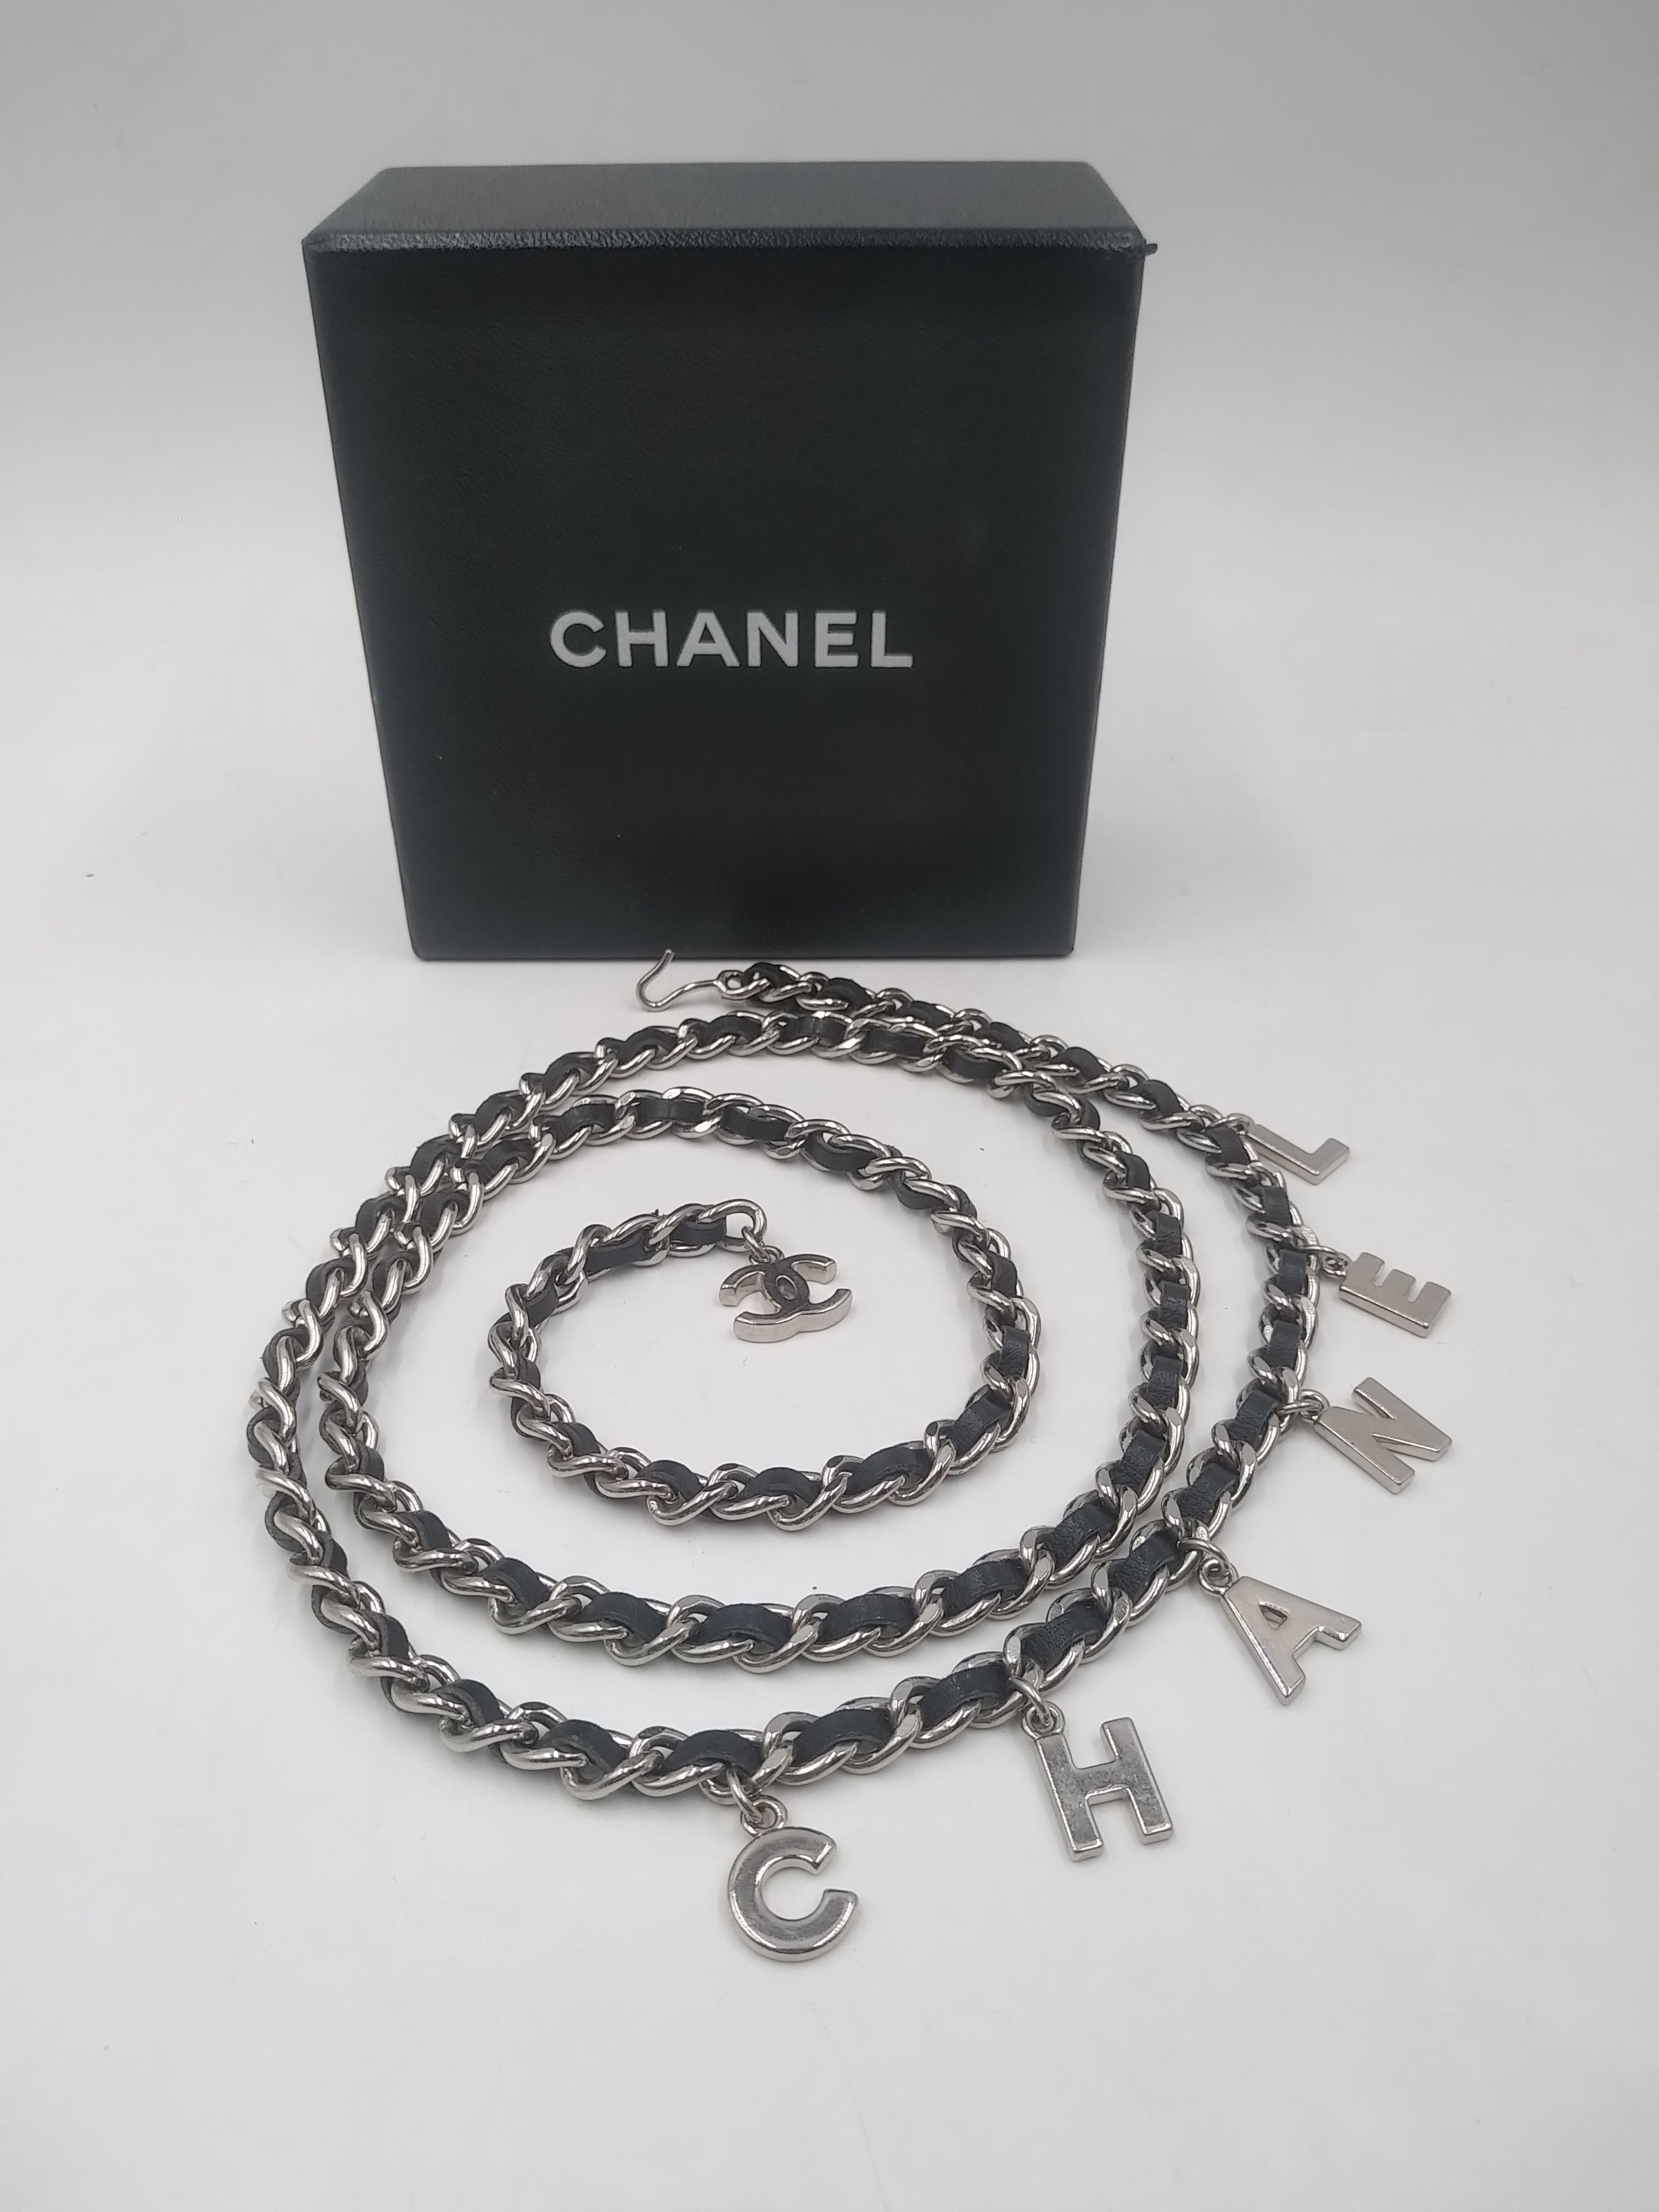 Chanel CC Logo Silver and Black Leather Letter Chain Belt Necklace Bracelet, 2006
- 100% authentic Chanel
- Black leather and metal
- Hook clasp closure
- Silvertone
- length 94 cm